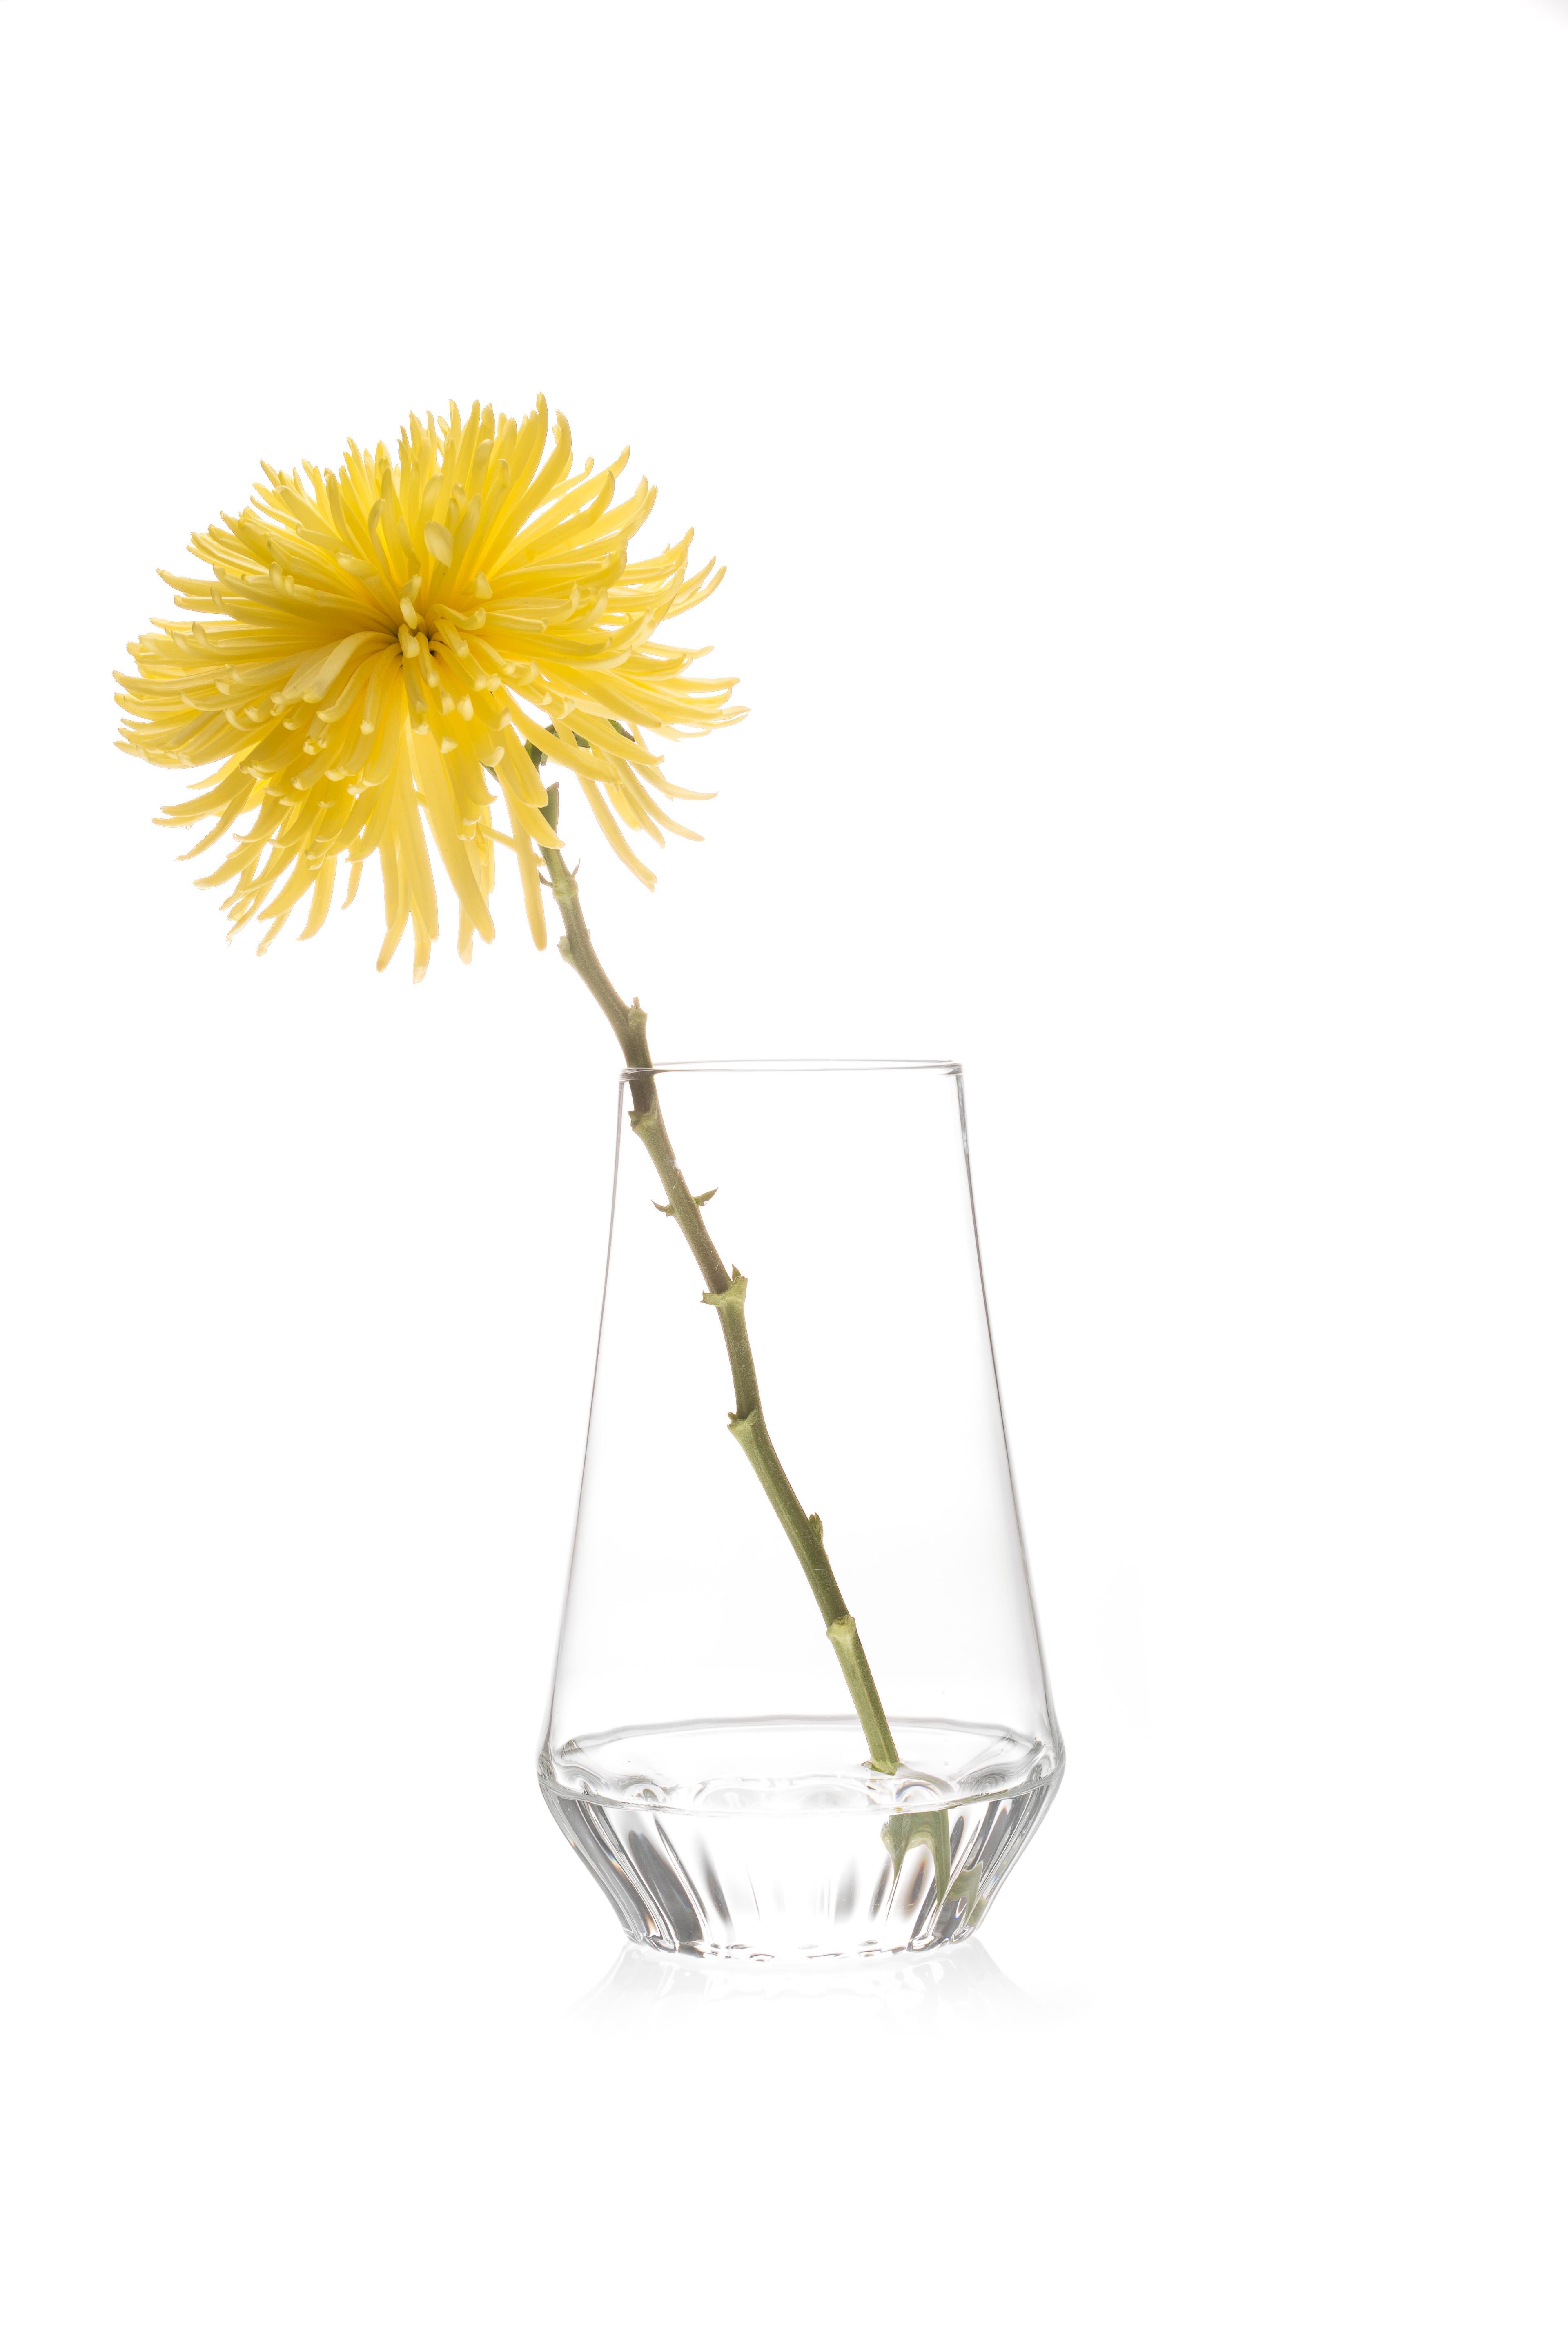 ROSSI VASE LARGE 

From a single stem to a bouquet, the clear glass highlights the flower stem, celebrating it as an integral part of the arrangement. The lenticular effect of the fluted glass at the
bottom masks the ends of the stems and serves as